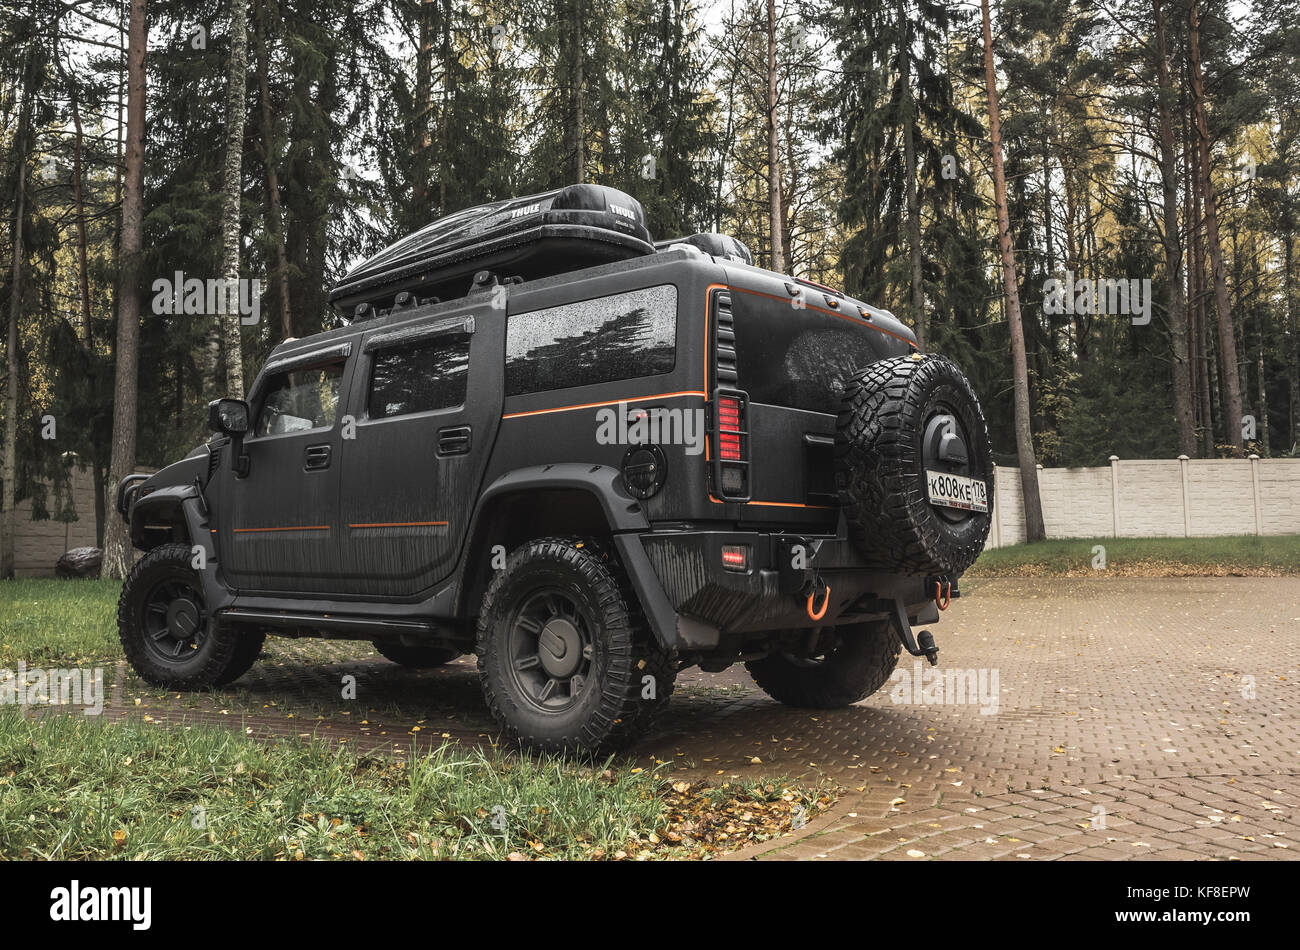 Saint-Petersburg, Russia - October 8, 2017: Black Hummer H2 car stands on rural parking in Russian countryside, front view Stock Photo